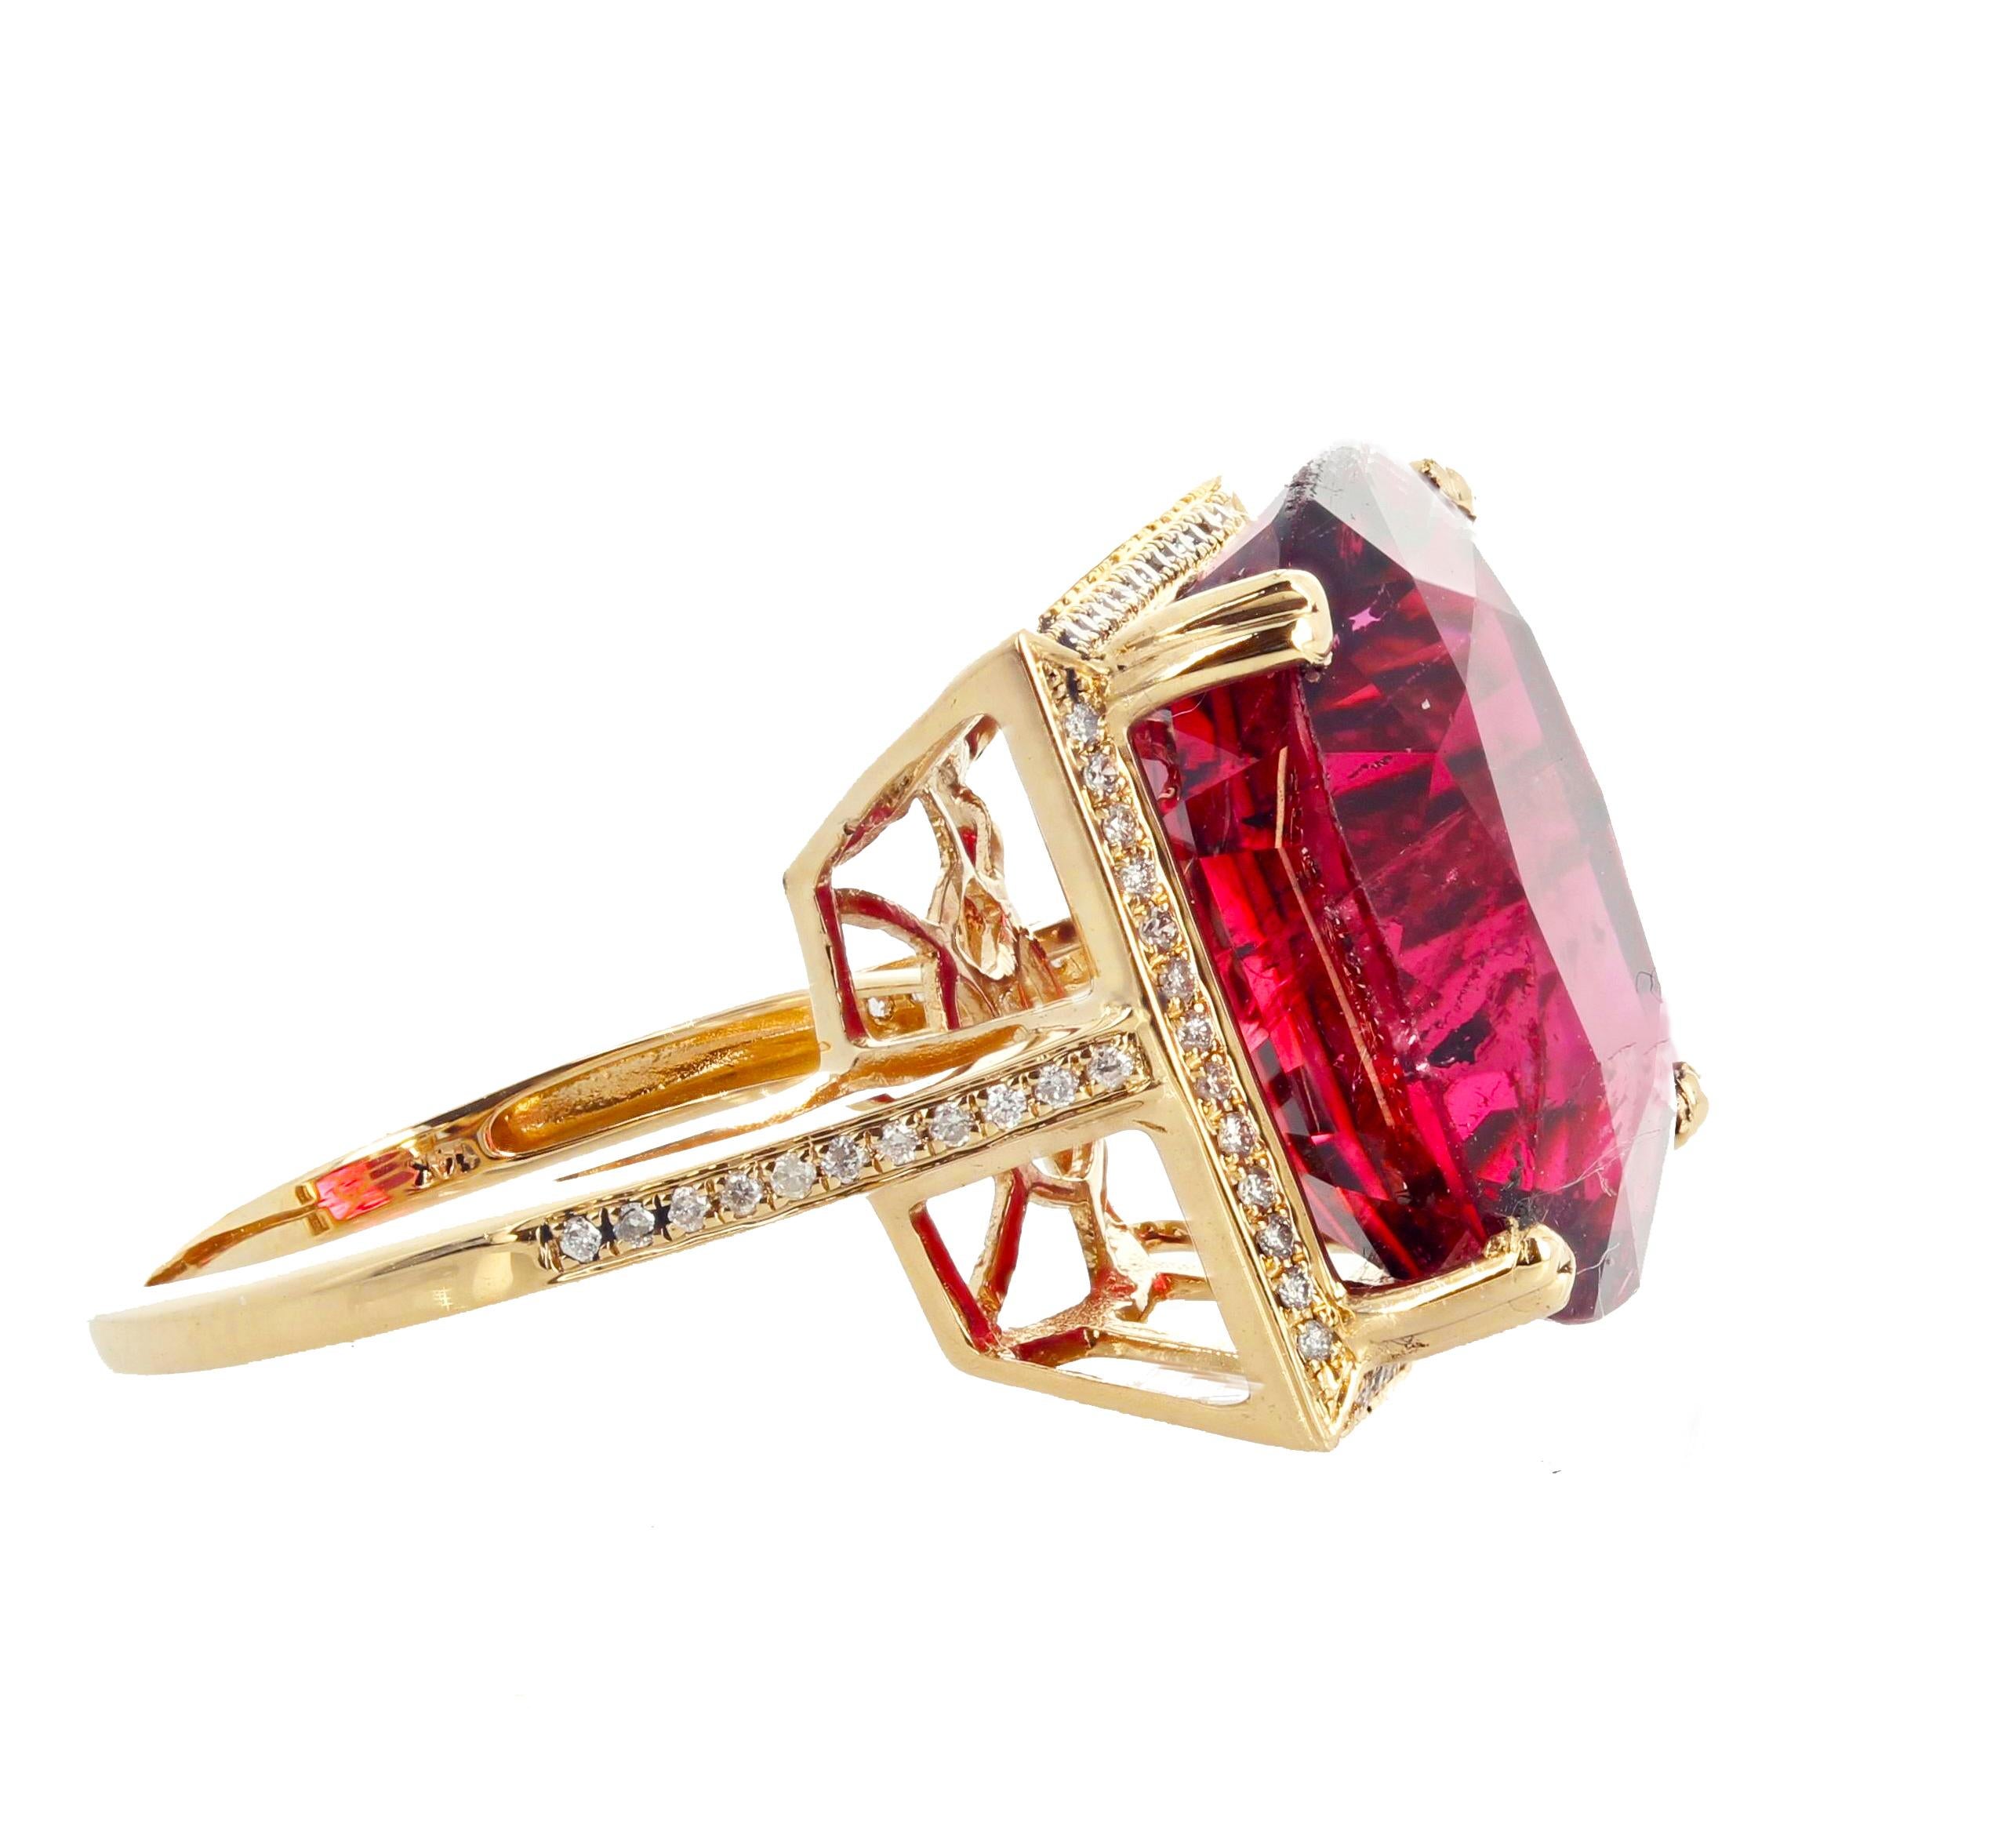 Oval Cut AJD Glittering 16.21 Ct. Clear Red Tourmaline & Diamond 14 Kt. Yellow Gold Ring For Sale